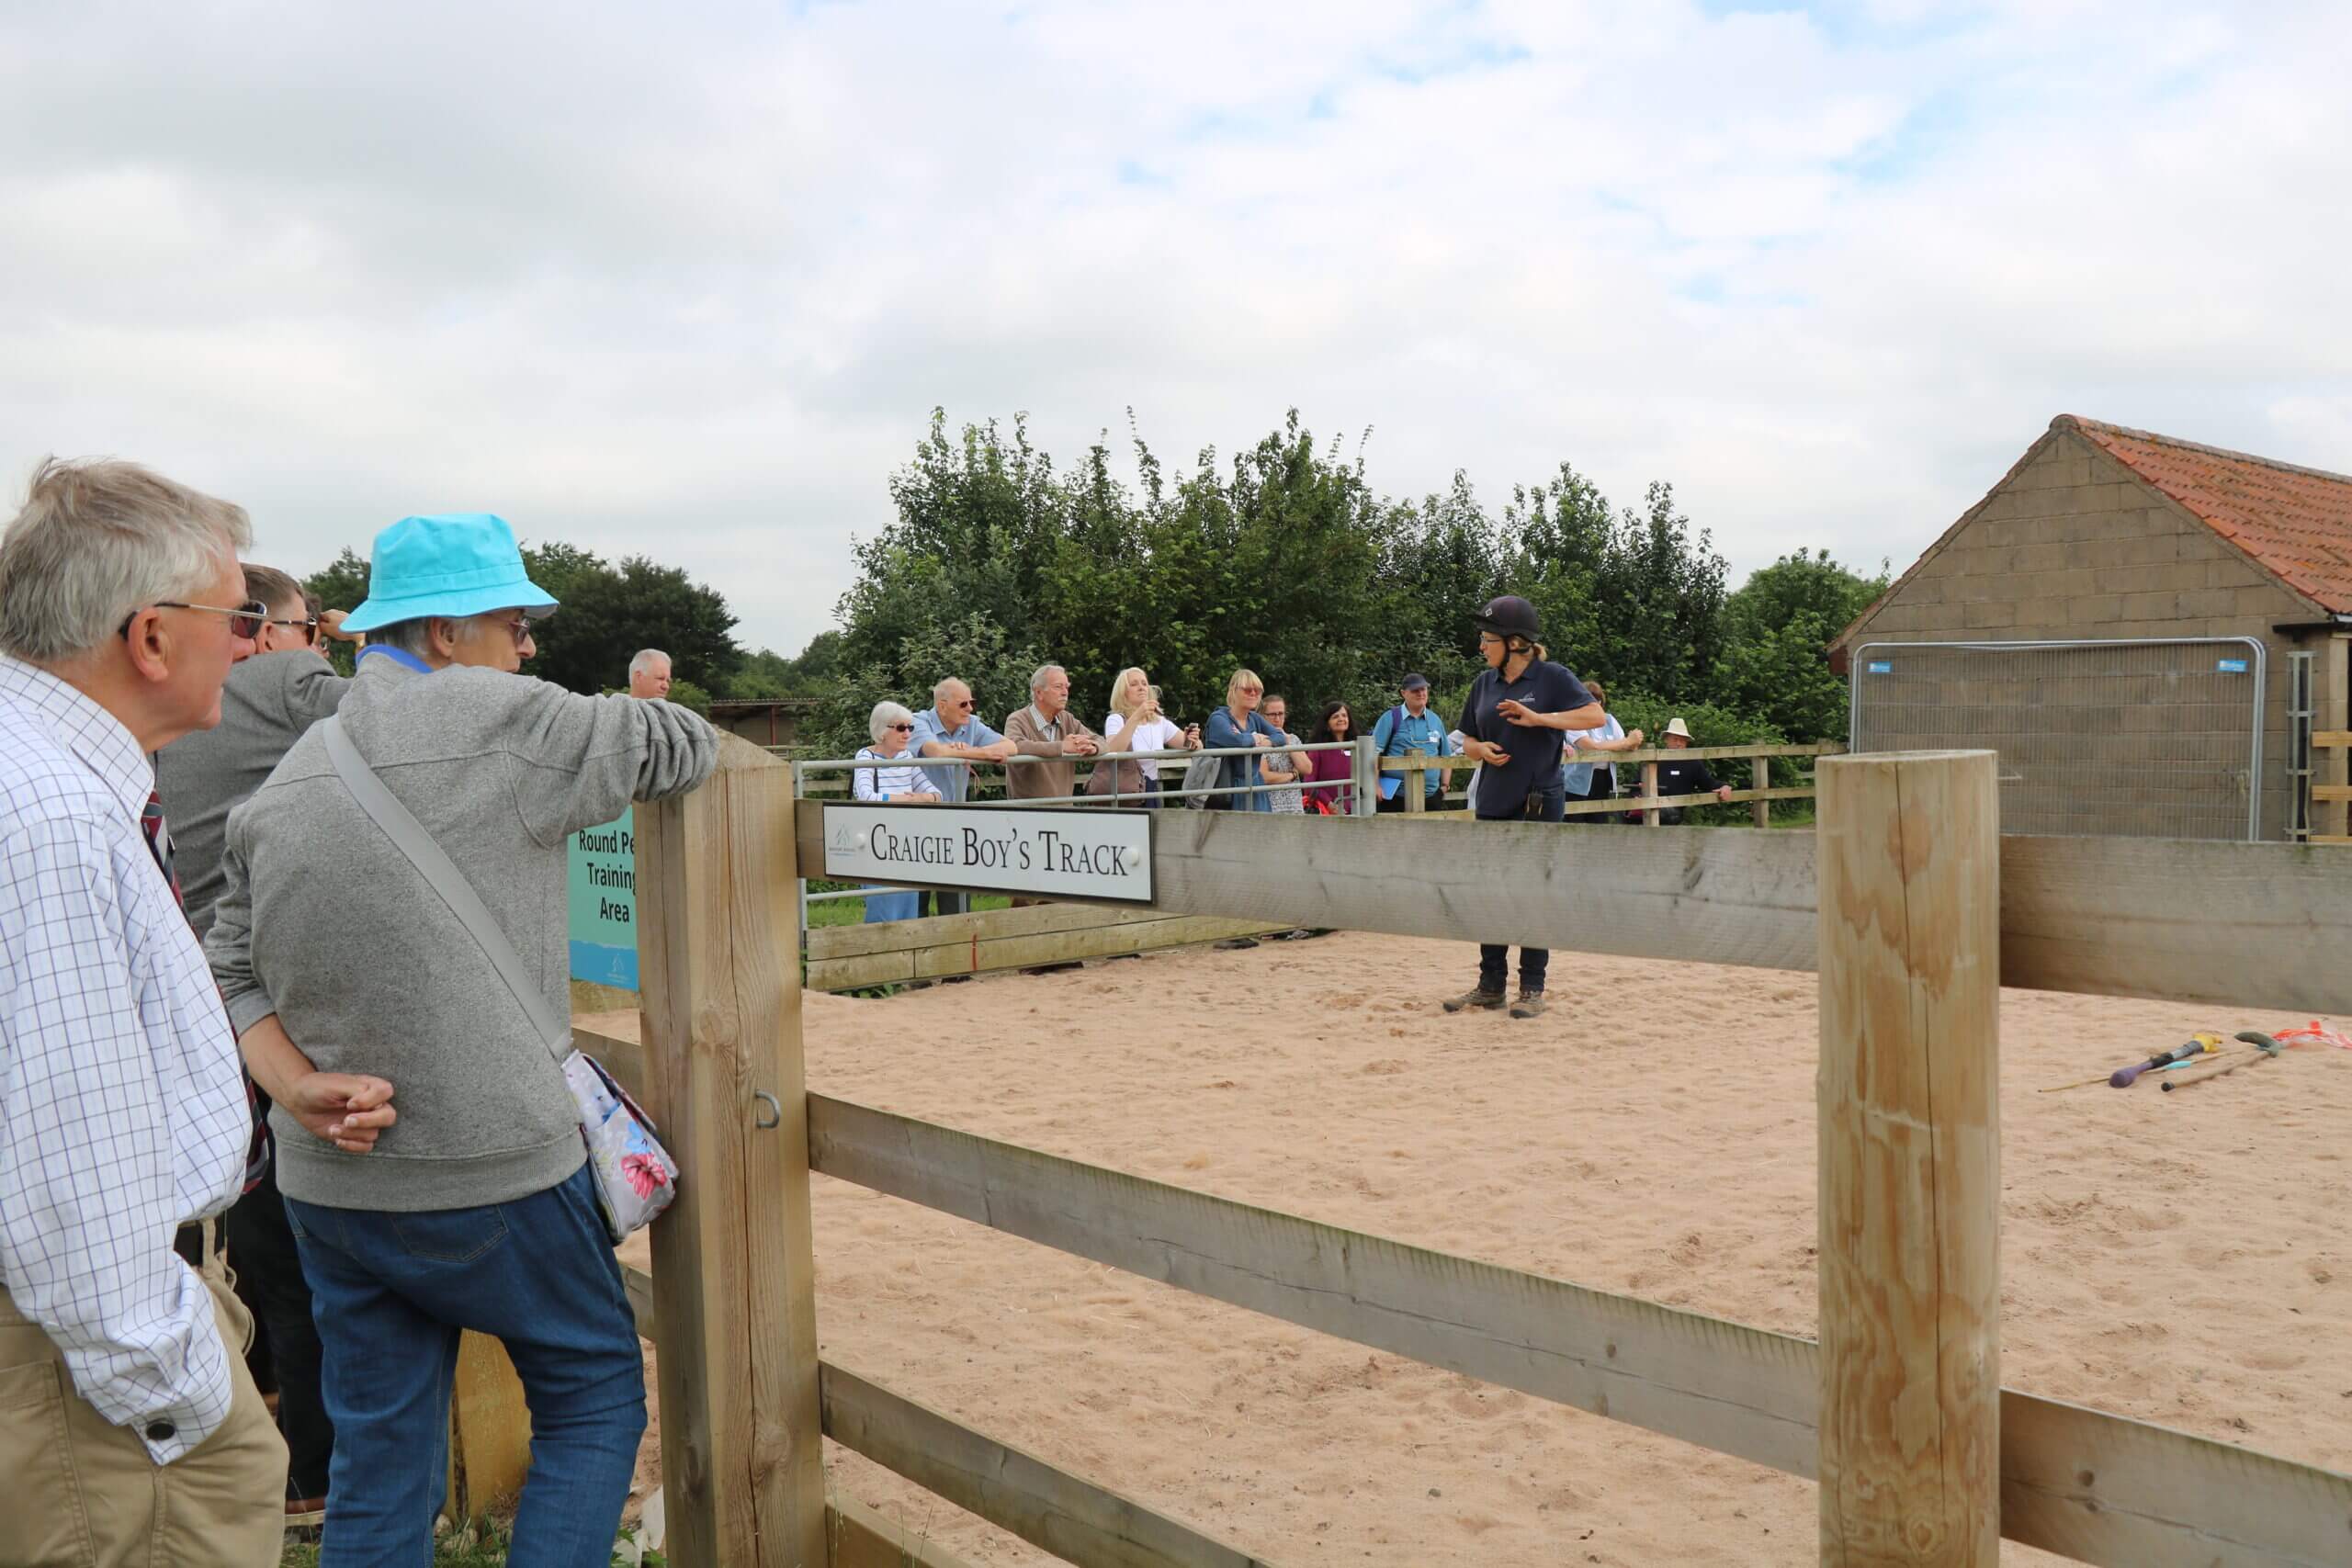 member of staff demonstrating equine training at a vip day